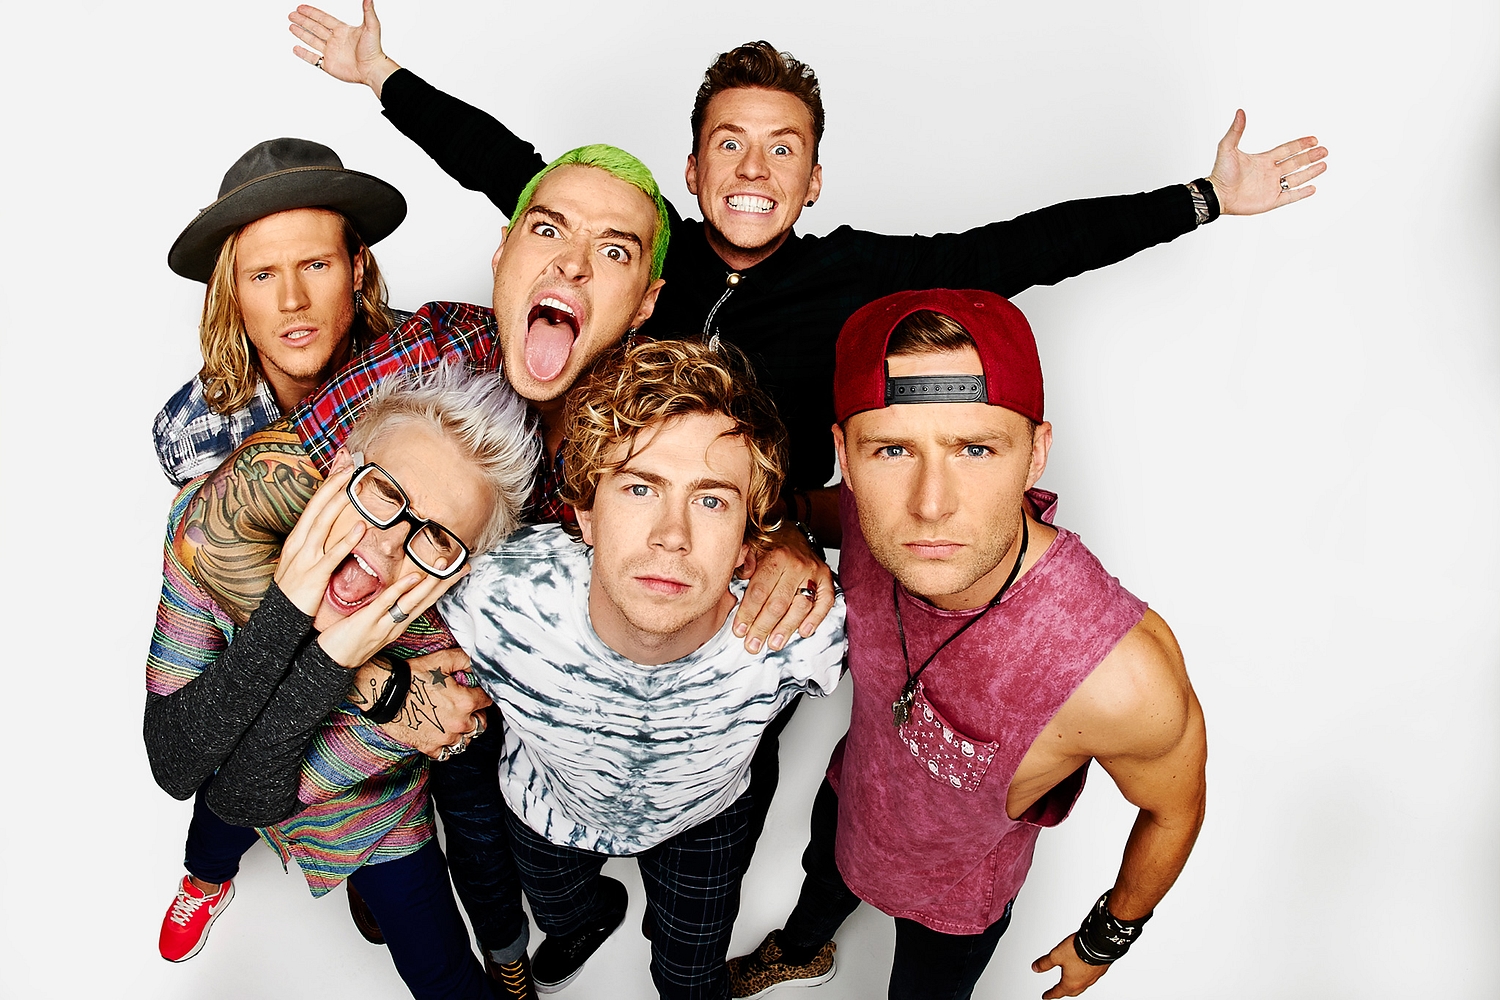 The Godfathers of guitar pop: now McBusted roll with rock royalty